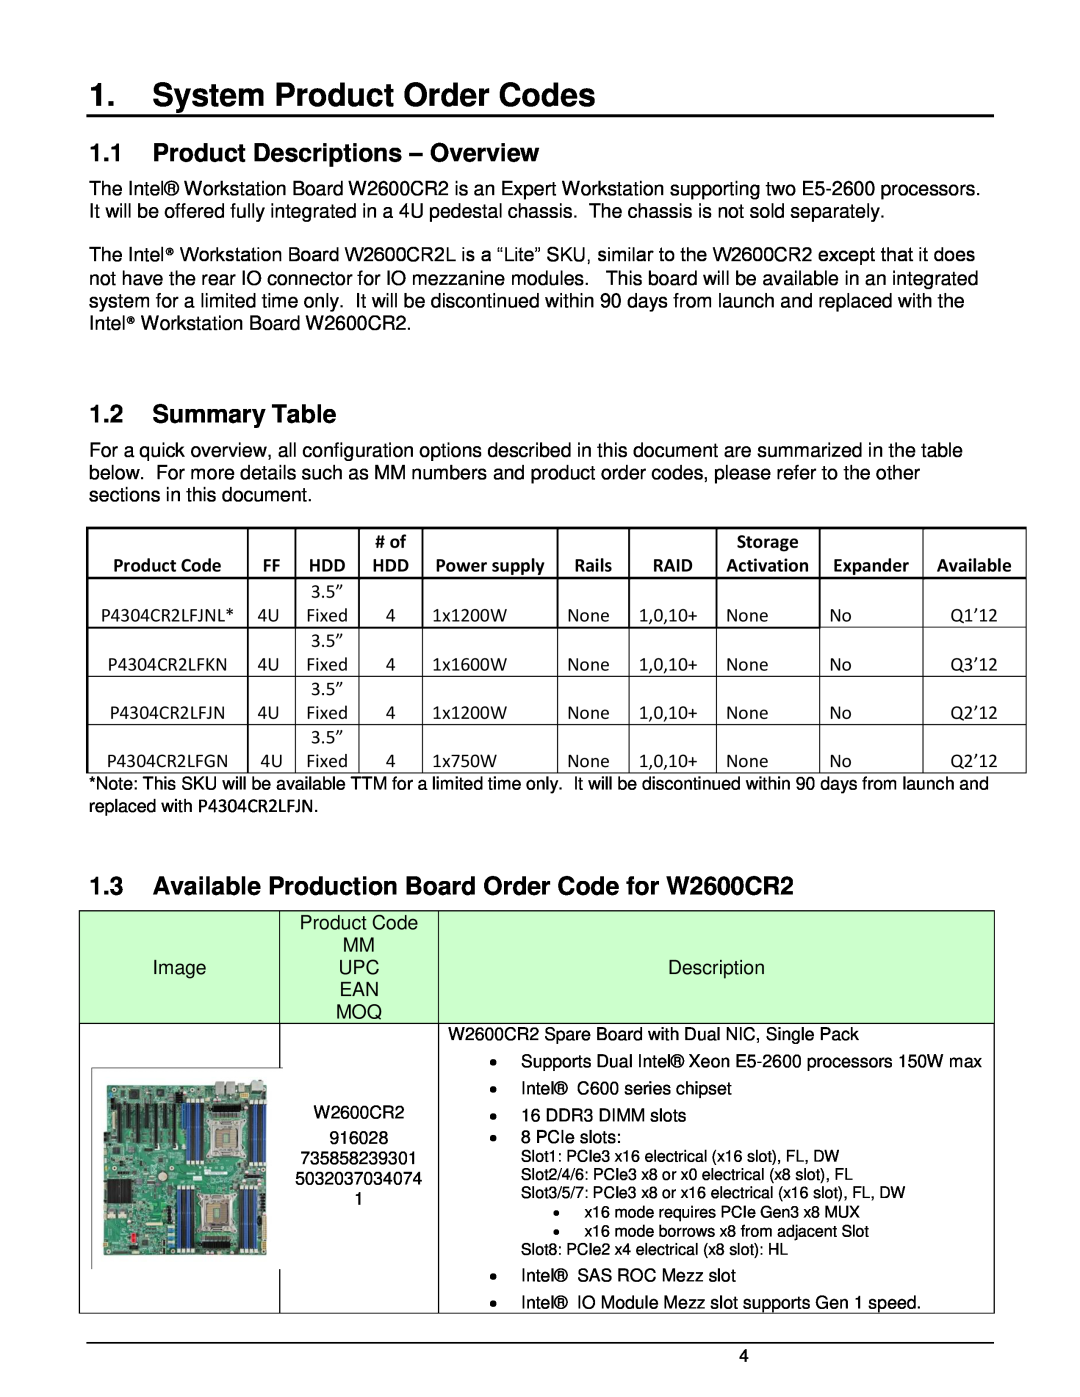 Intel W2600CR2 System Product Order Codes, 1.1Product Descriptions - Overview, 1.2Summary Table, # of, Storage, Rails 